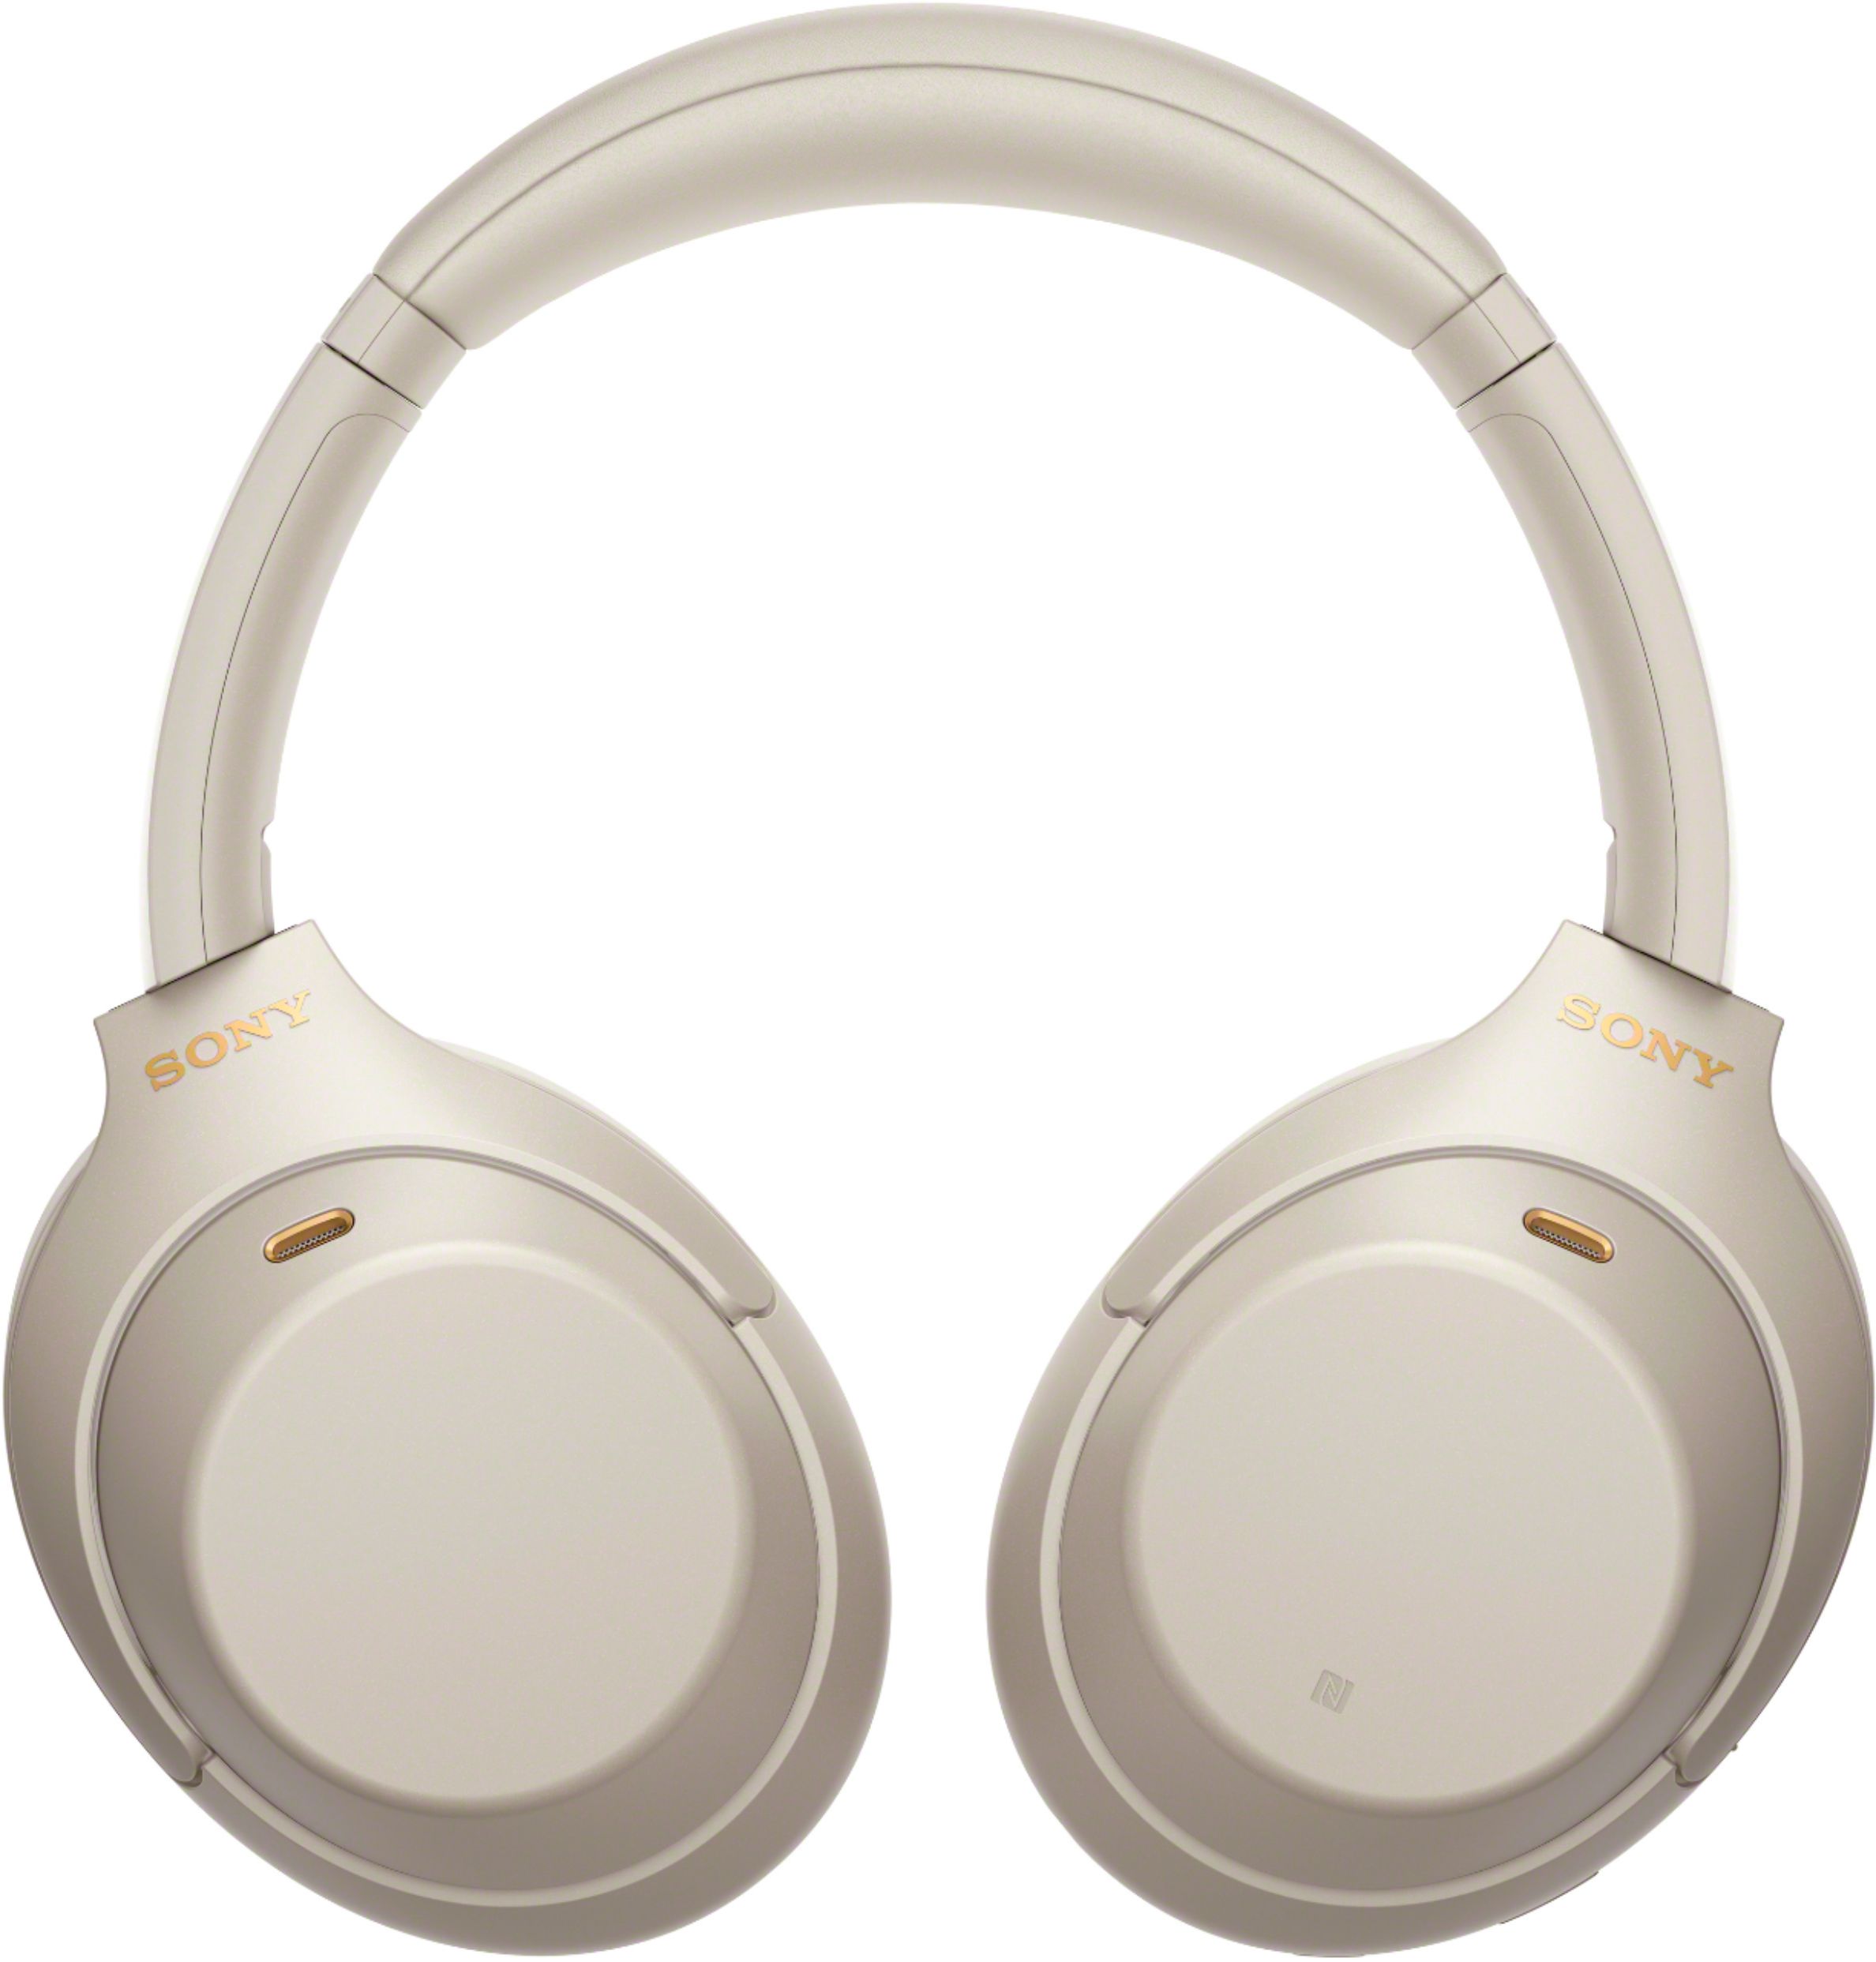 Sony WH-1000XM4 Wireless Noise-Cancelling Over-the-Ear Headphones Silver  WH1000XM4/S - Best Buy